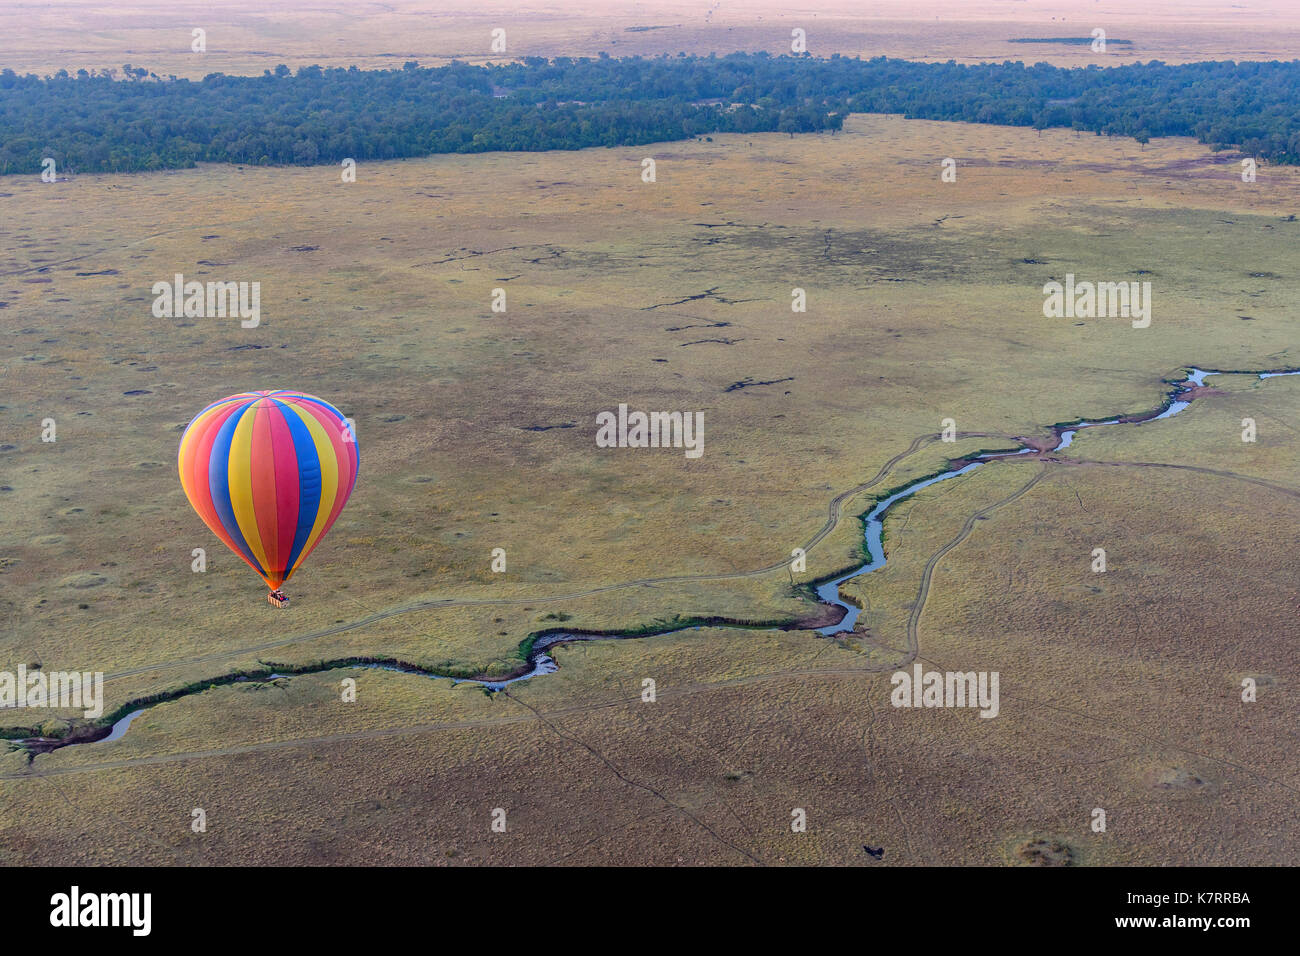 Hot air ballon over the Masai Mara preserve in Kenya during the great migration Stock Photo